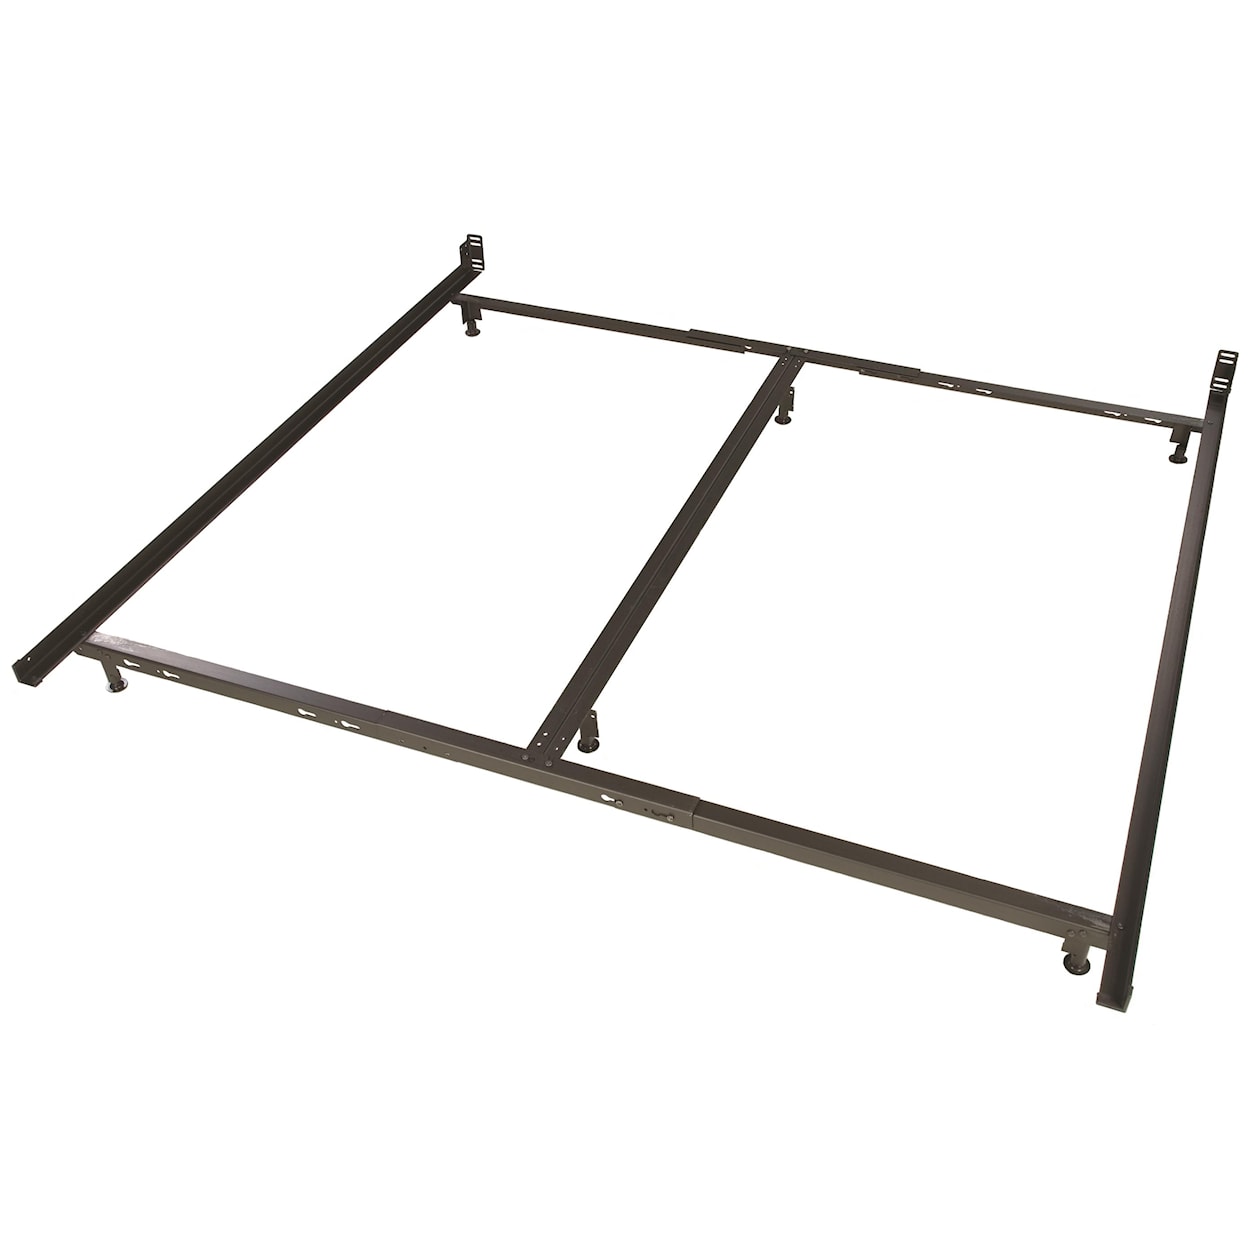 Glideaway Low Profile Bed Frames 6 Leg Low Profile Queen/King/Cal King Frame